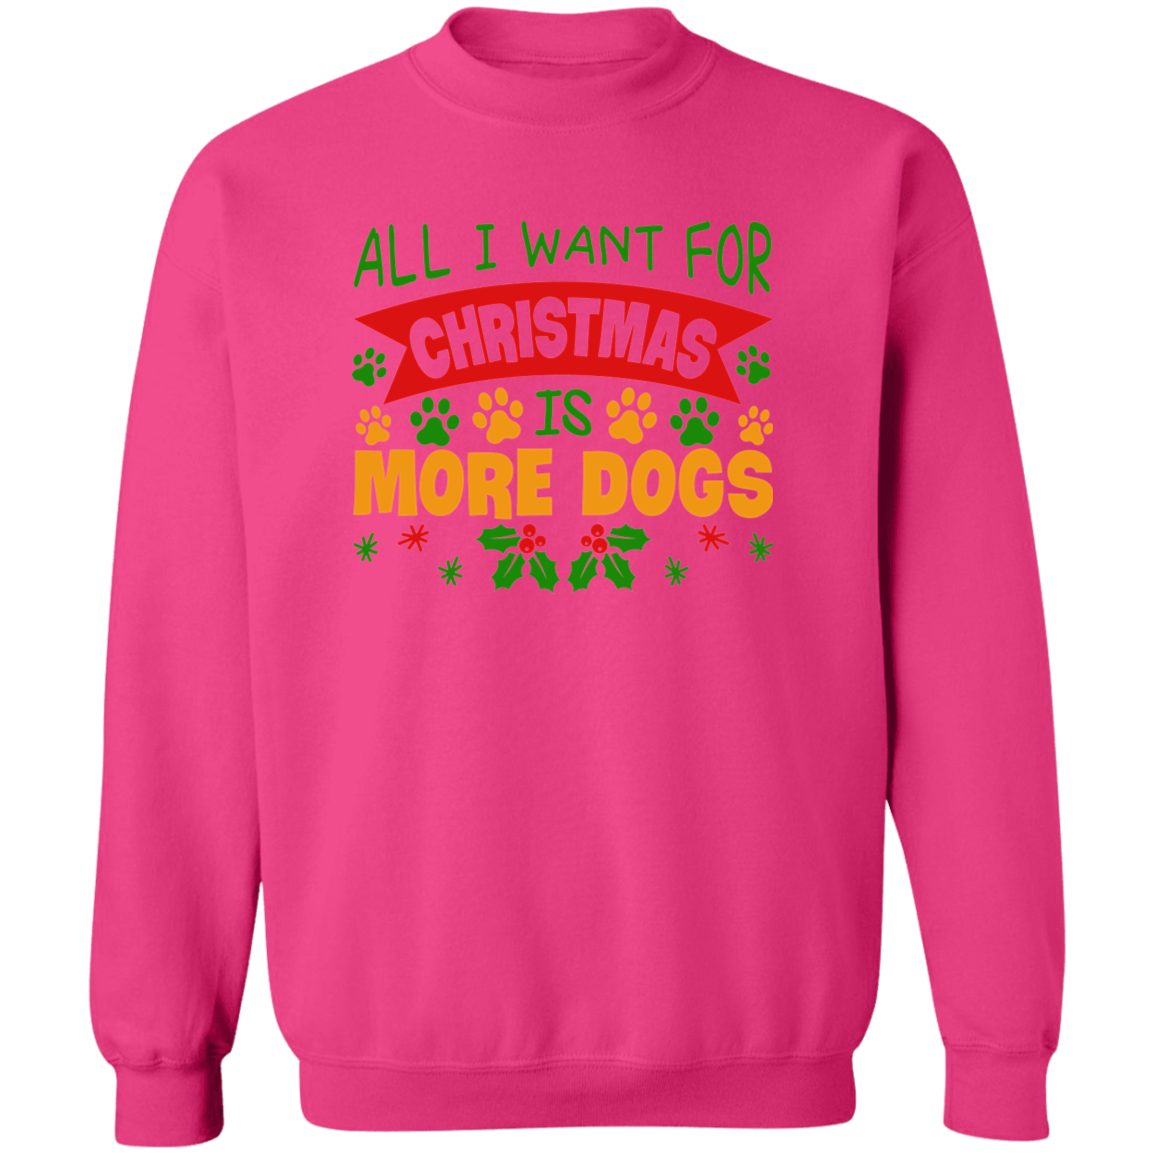 All I Want for Christmas is More Dogs Crewneck Pullover Sweatshirt